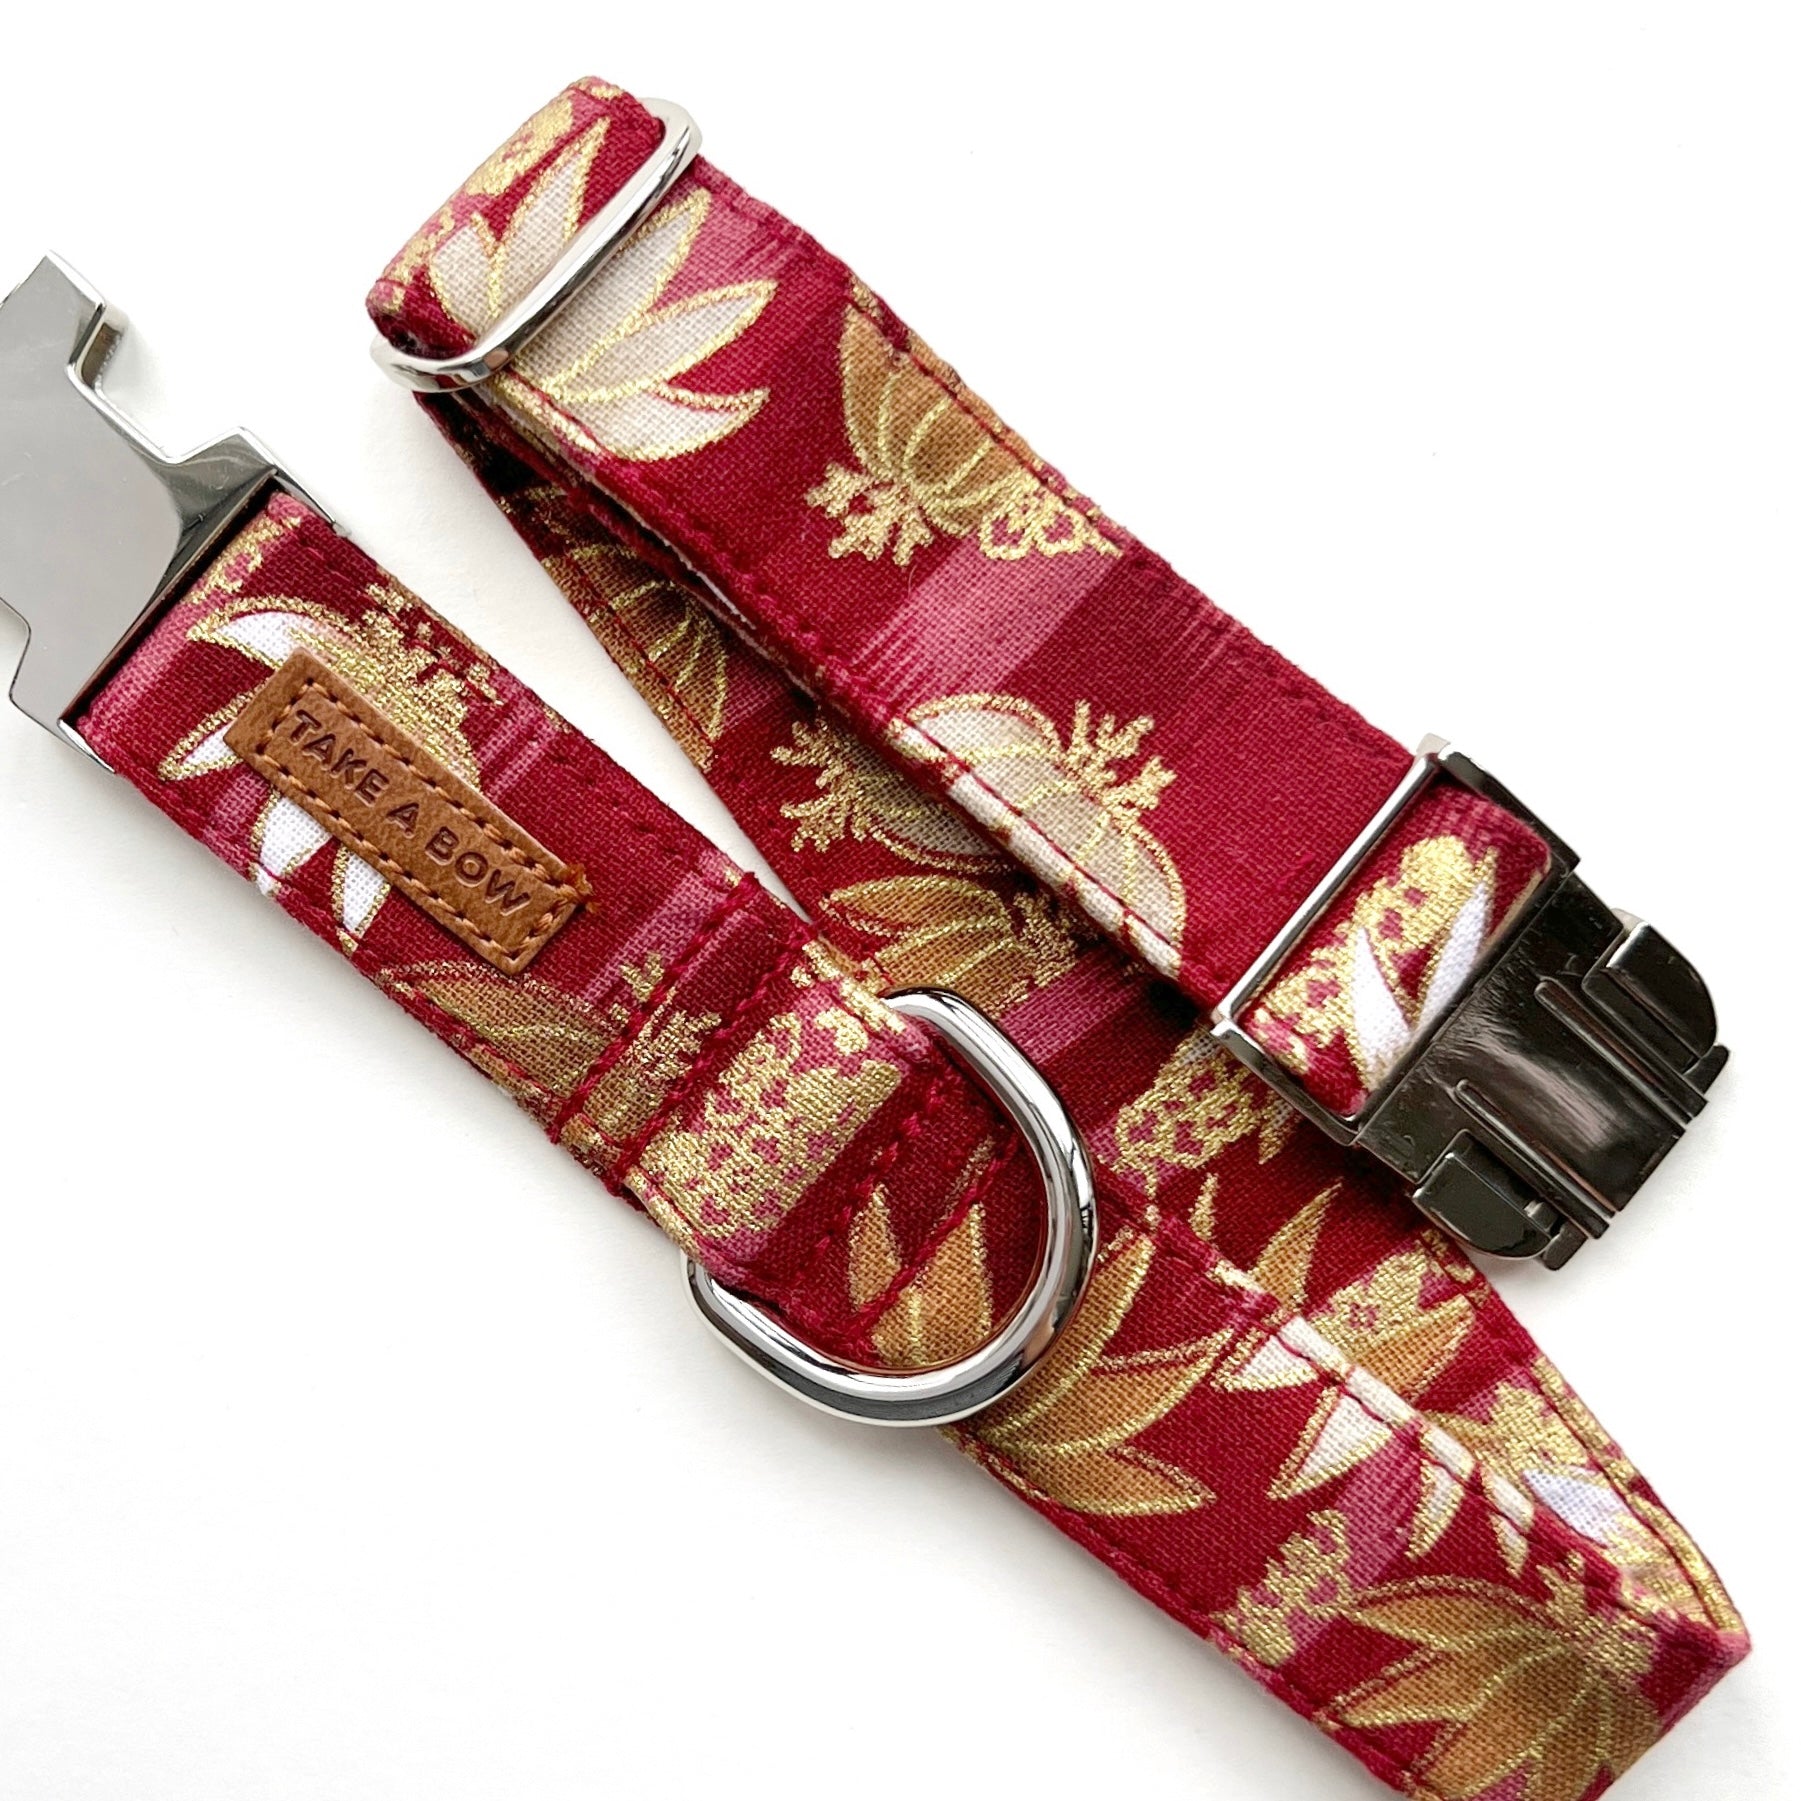 BAMBOO CHIKURIN RED - SAILOR BOW